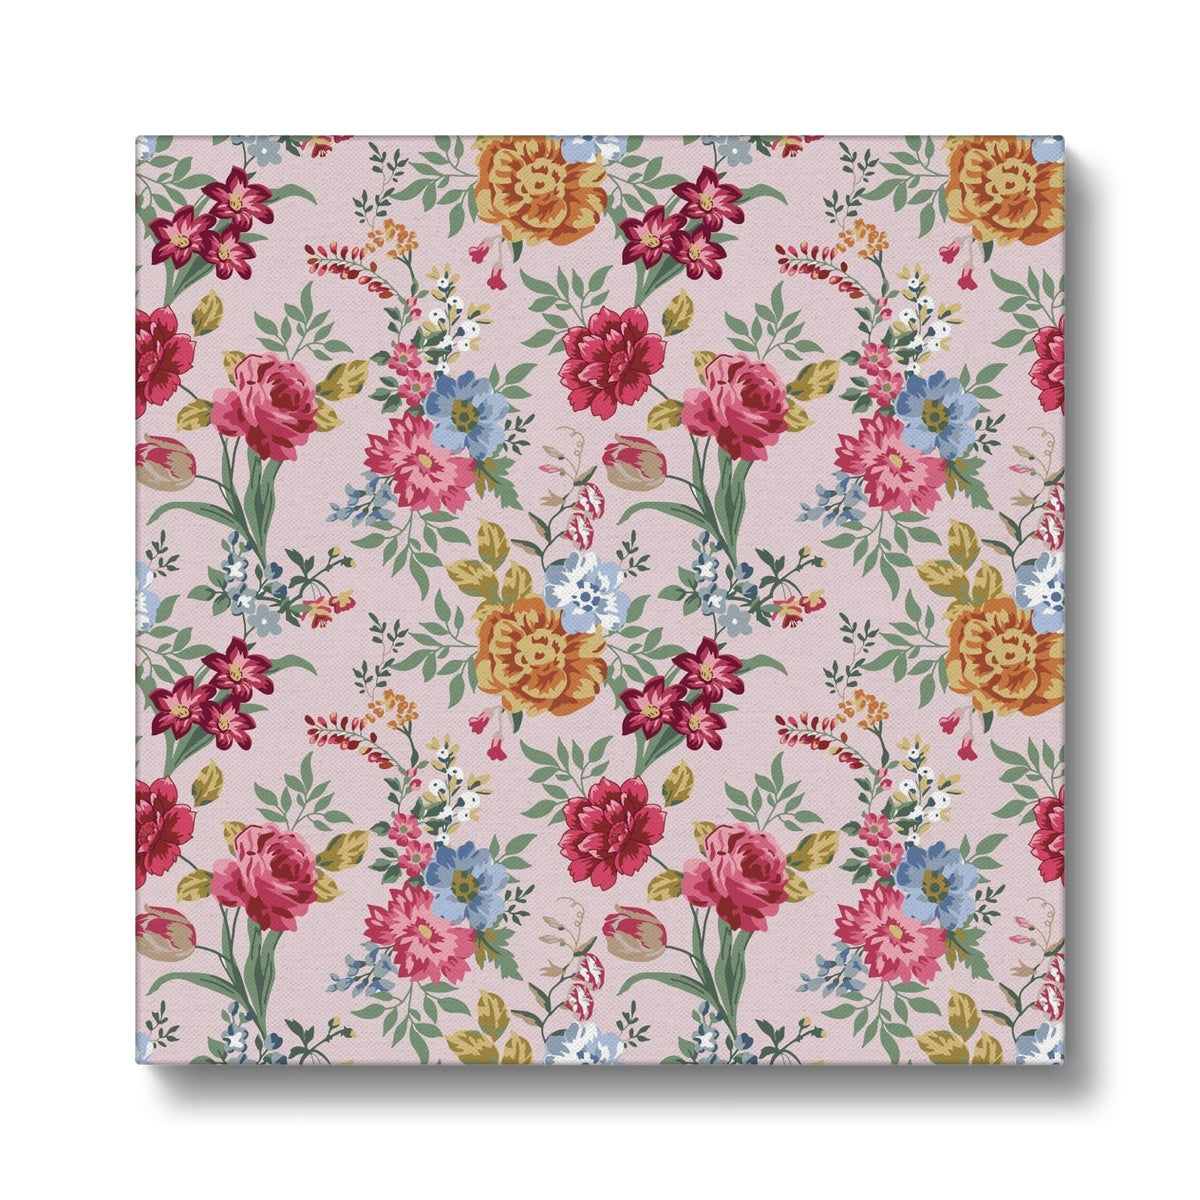 Maximal Pink Tinted Floral Print Canvas